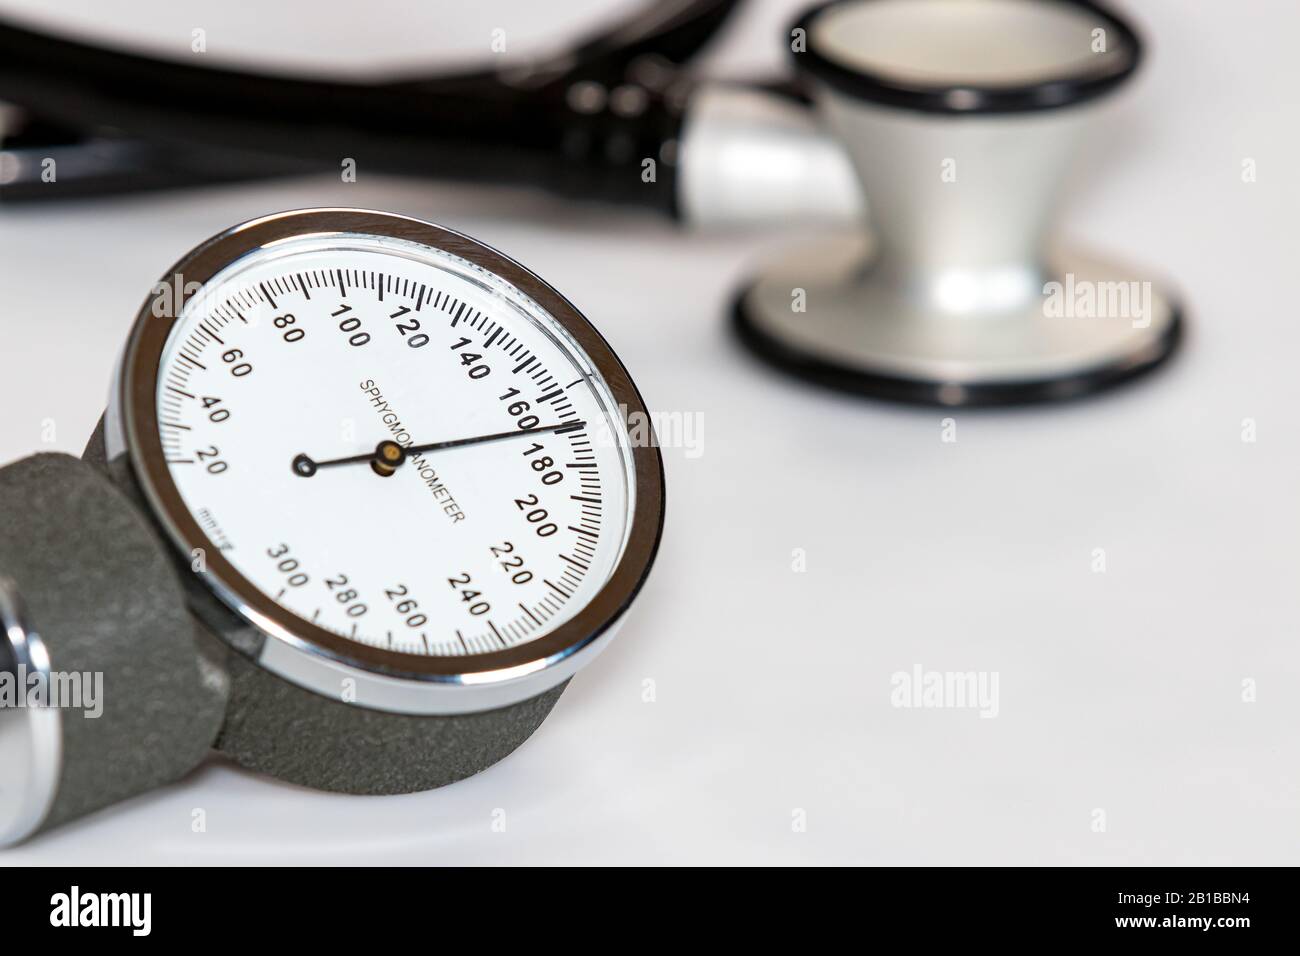 https://c8.alamy.com/comp/2B1BBN4/closeup-of-blood-pressure-cuff-gauge-with-high-systolic-reading-of-170-mmhg-stethoscope-in-background-2B1BBN4.jpg